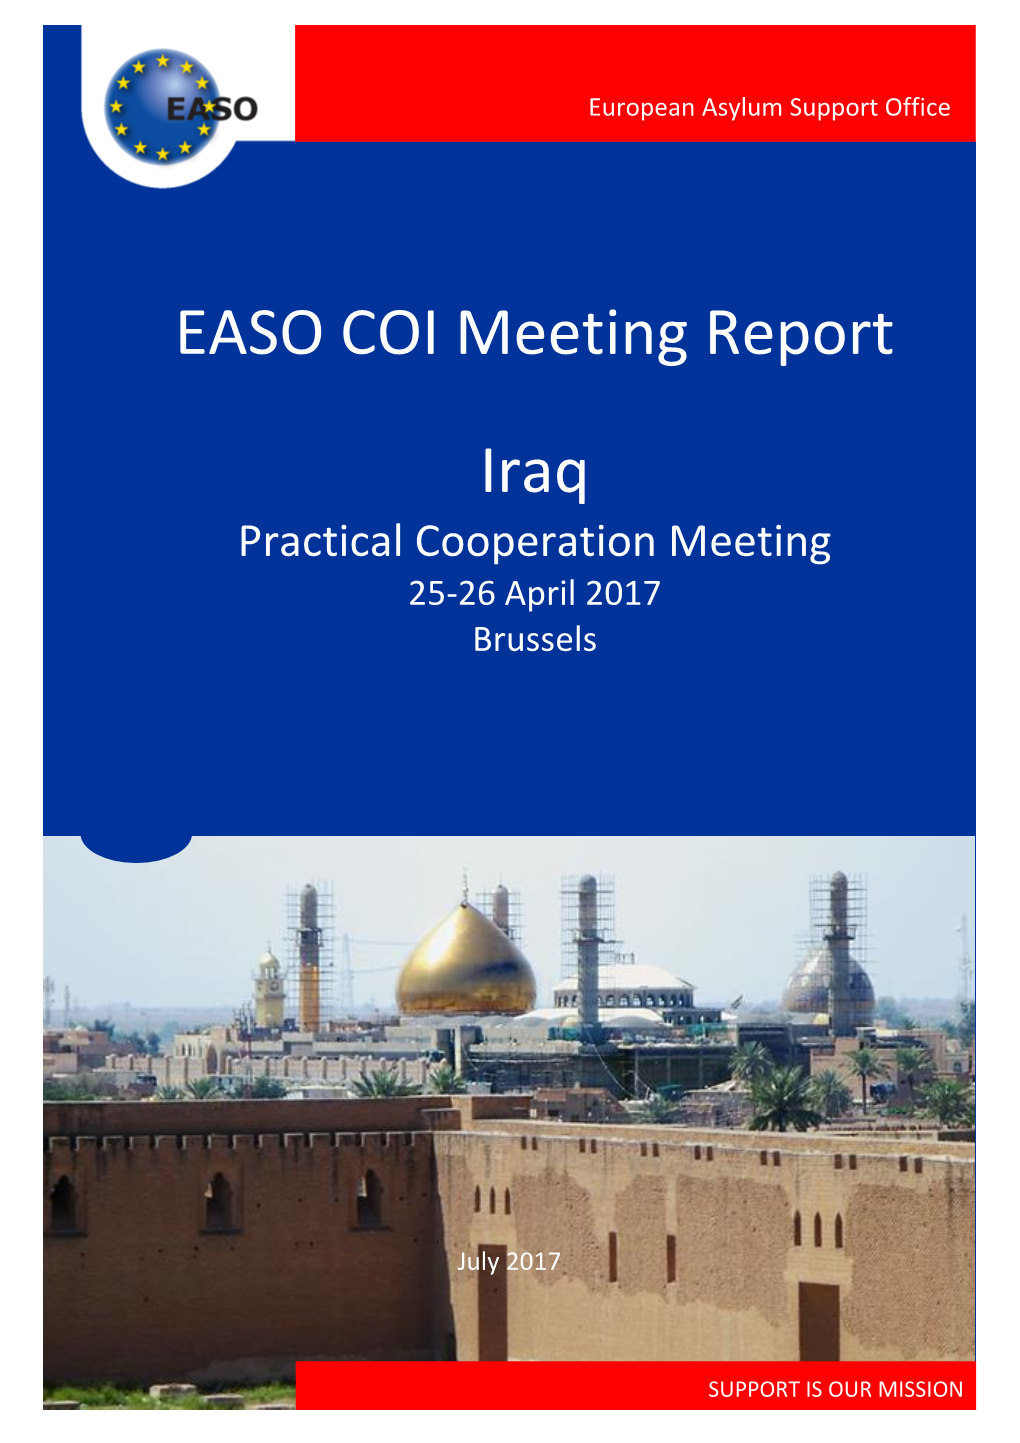 Iraq Practical Cooperation Meeting 25-26 April 2017 Brussels